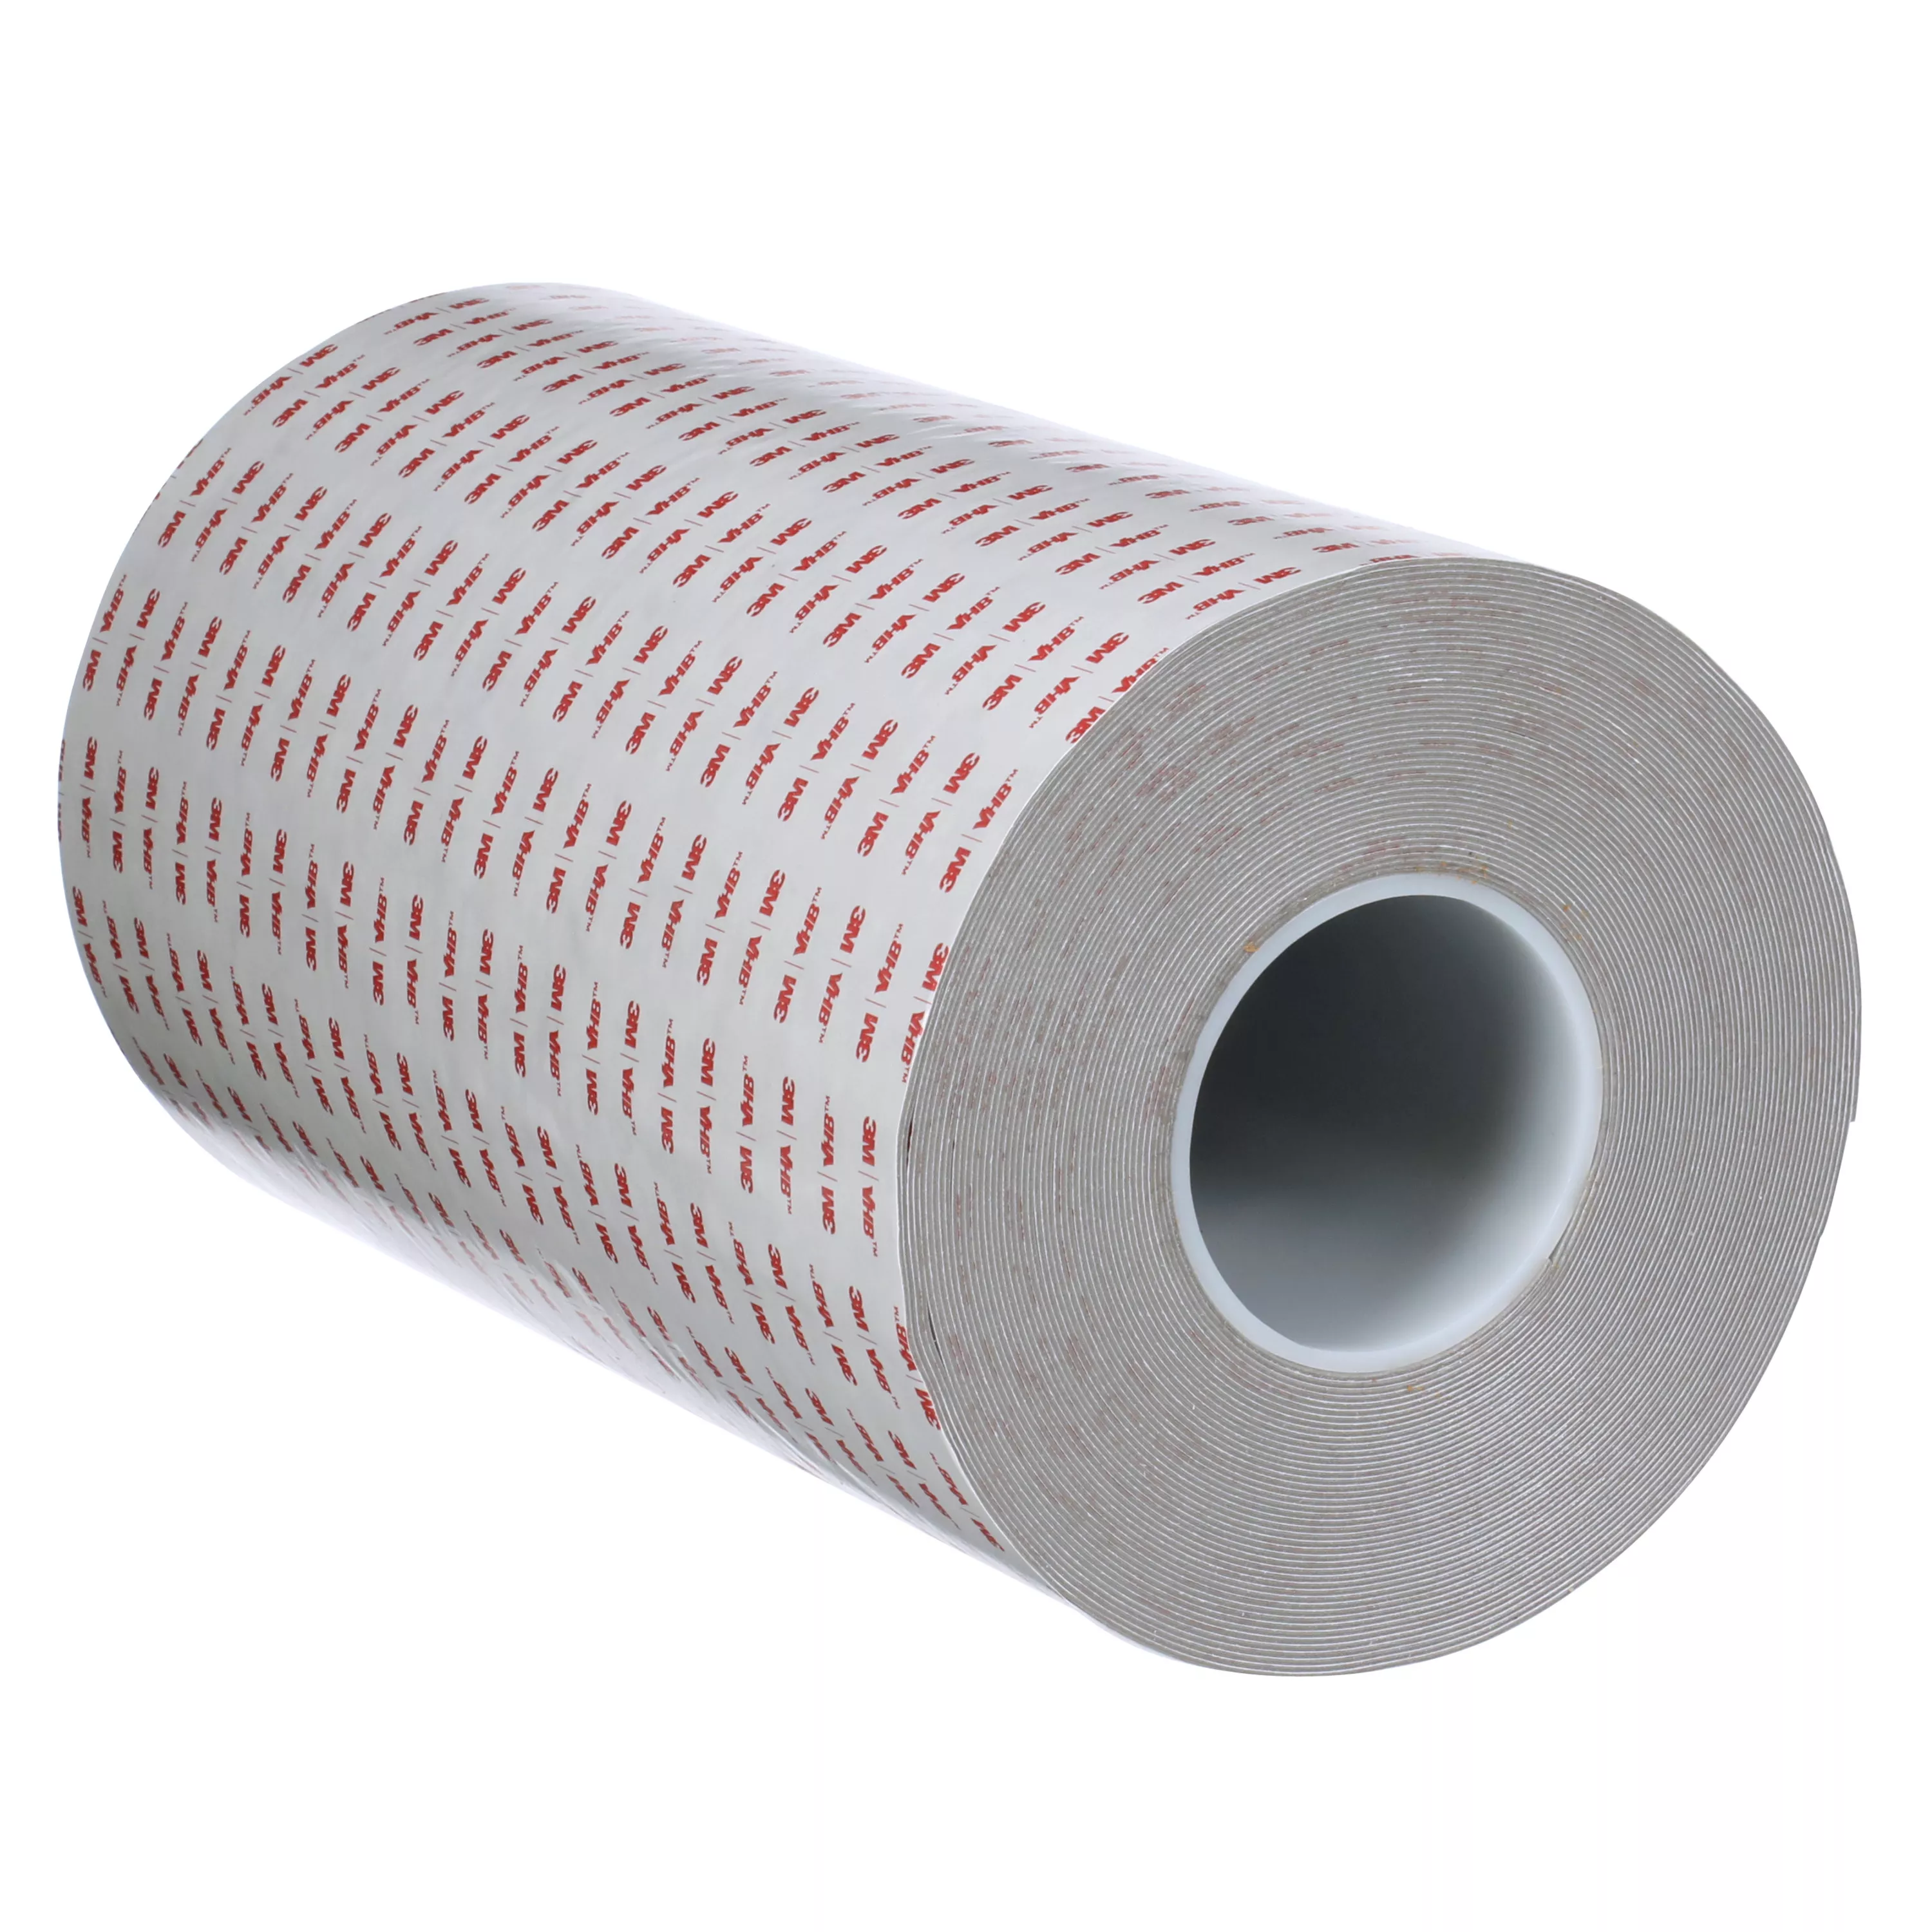 Product Number RP+110GP | 3M™ VHB™ Tape RP+110GP